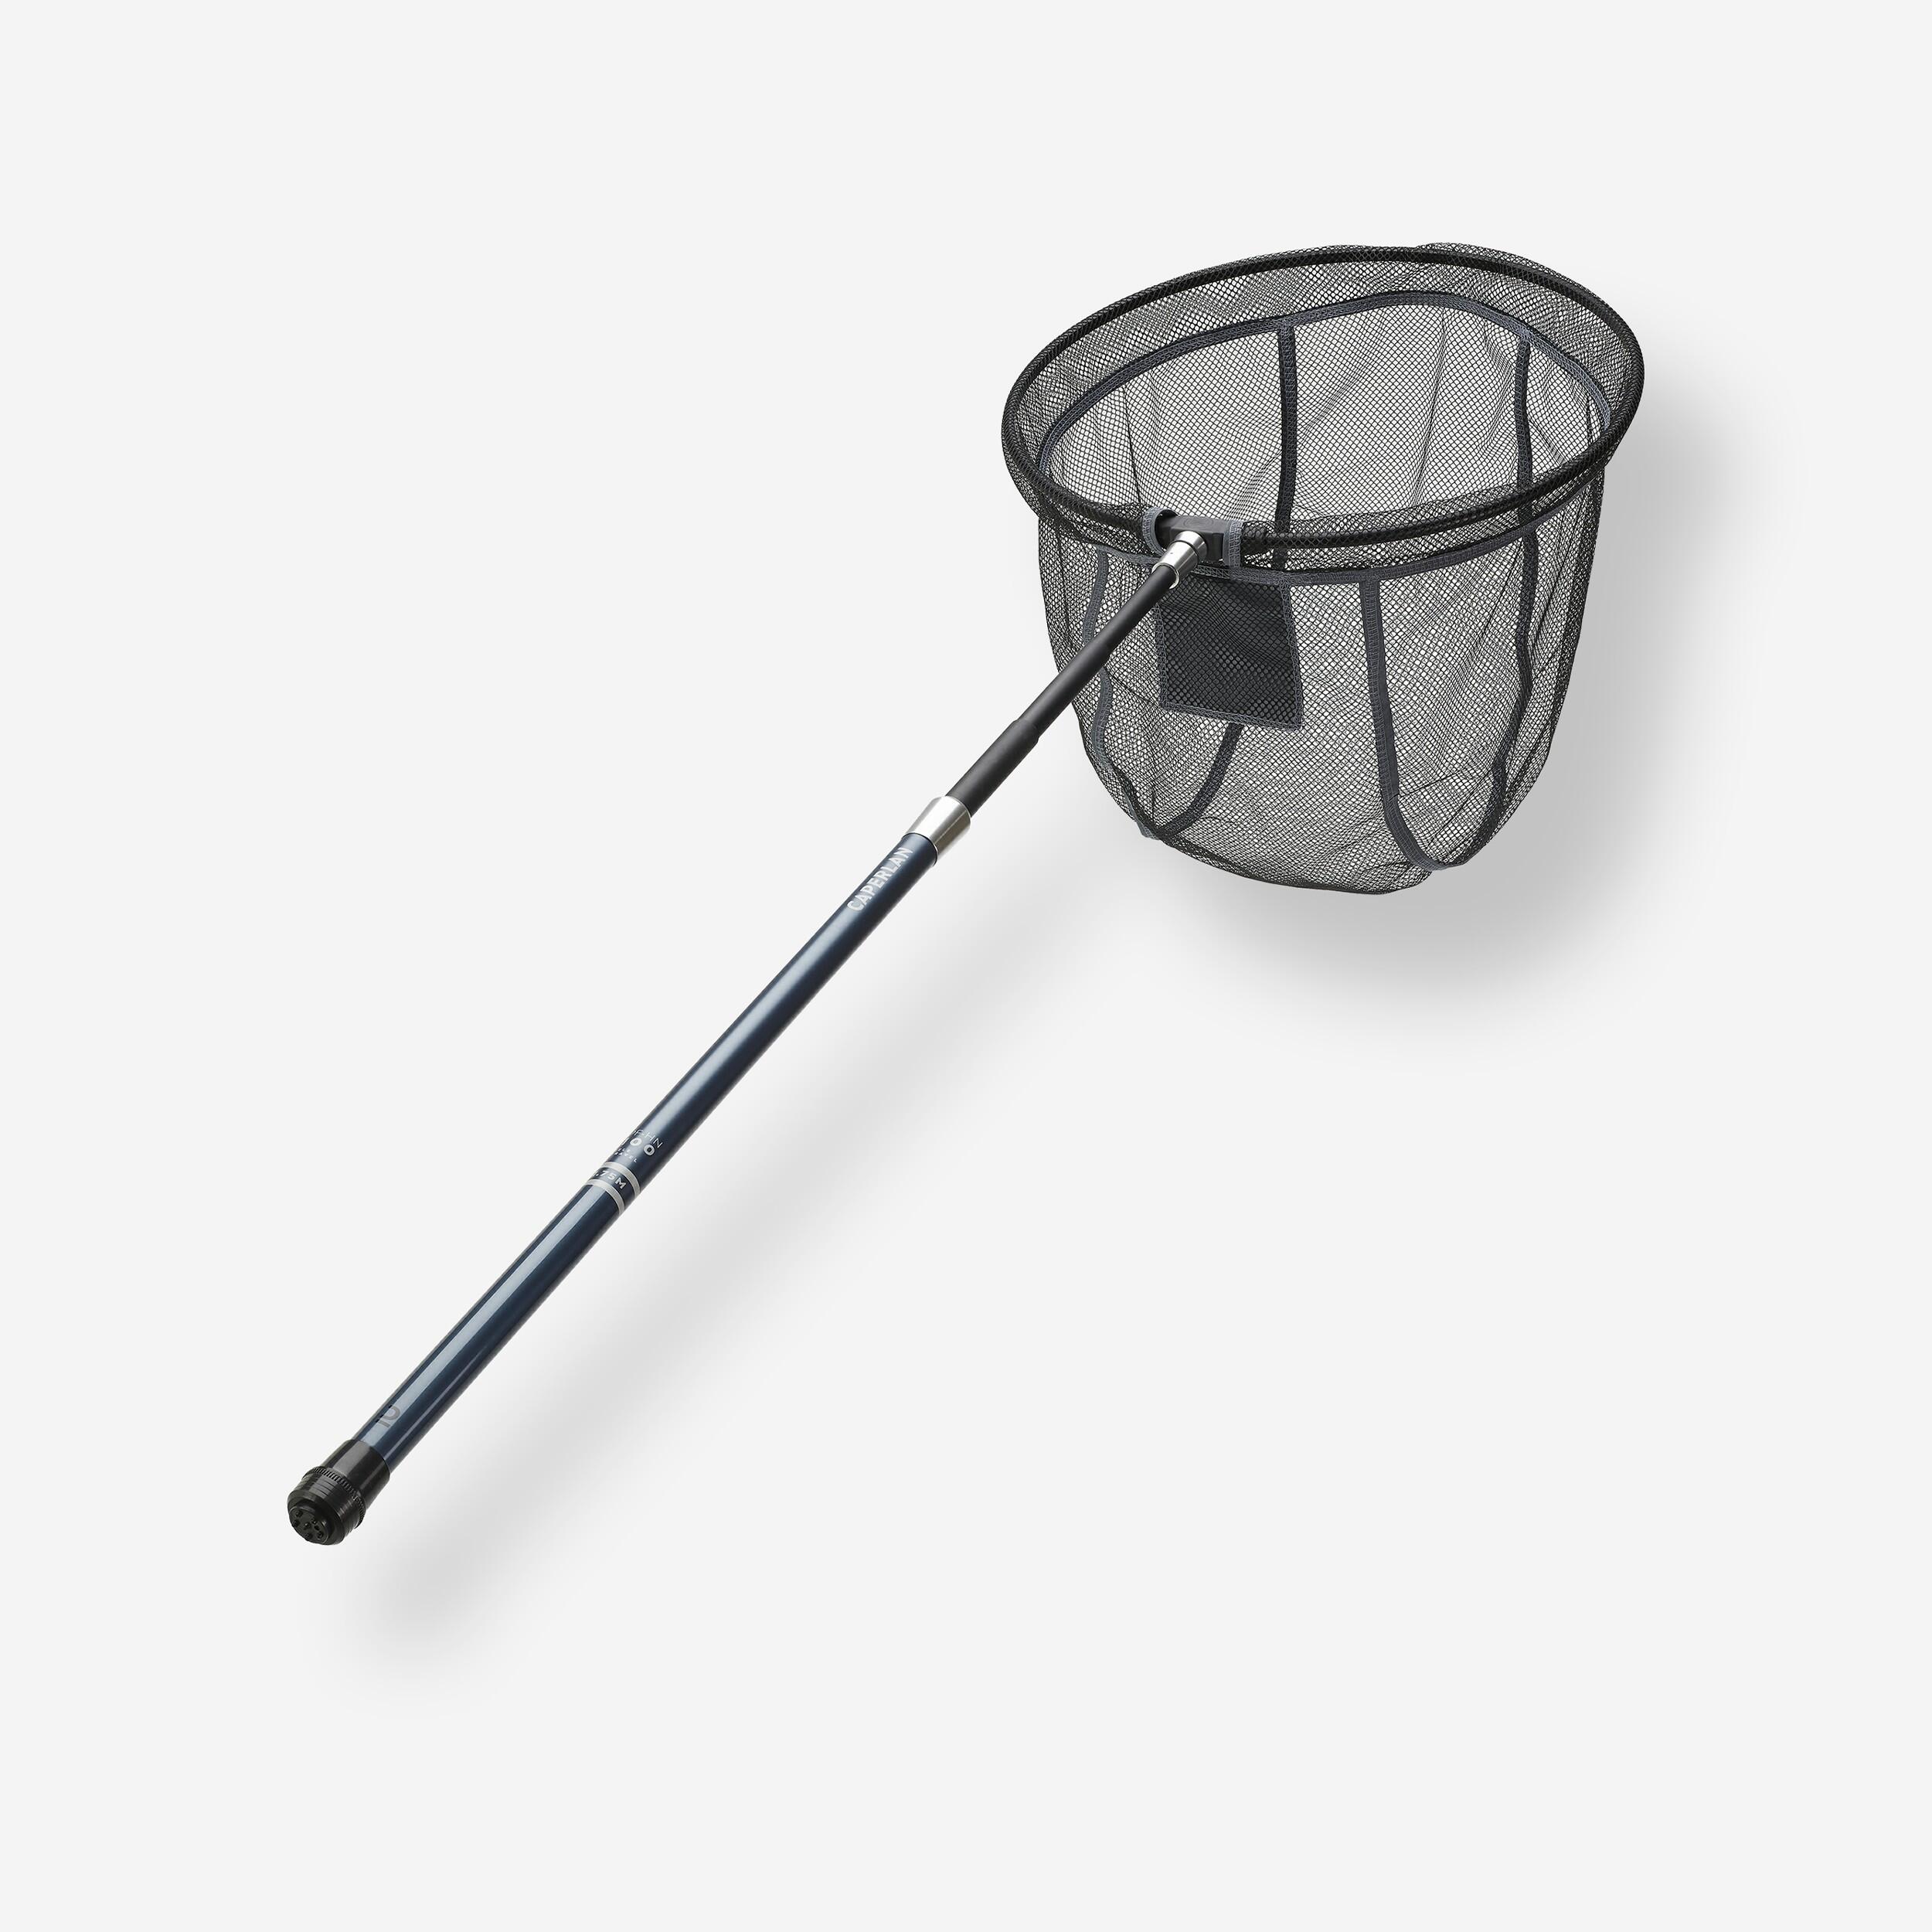 TELESCOPIC HANDLE + LANDING NET HEAD FOR LEARNING TO FISH FOR